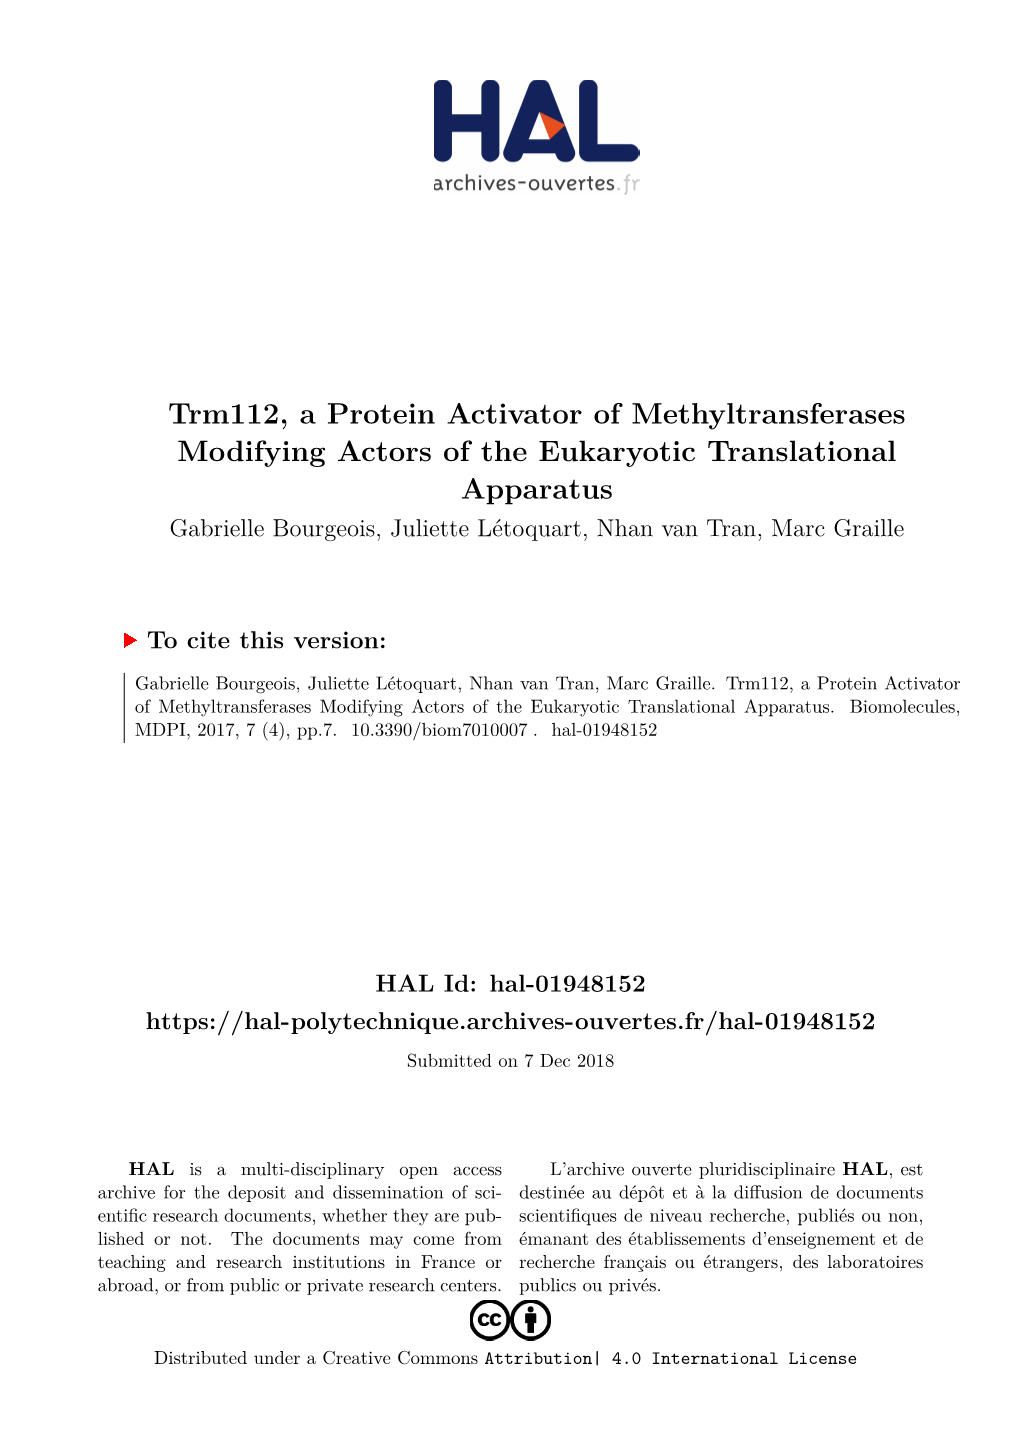 Trm112, a Protein Activator of Methyltransferases Modifying Actors of the Eukaryotic Translational Apparatus